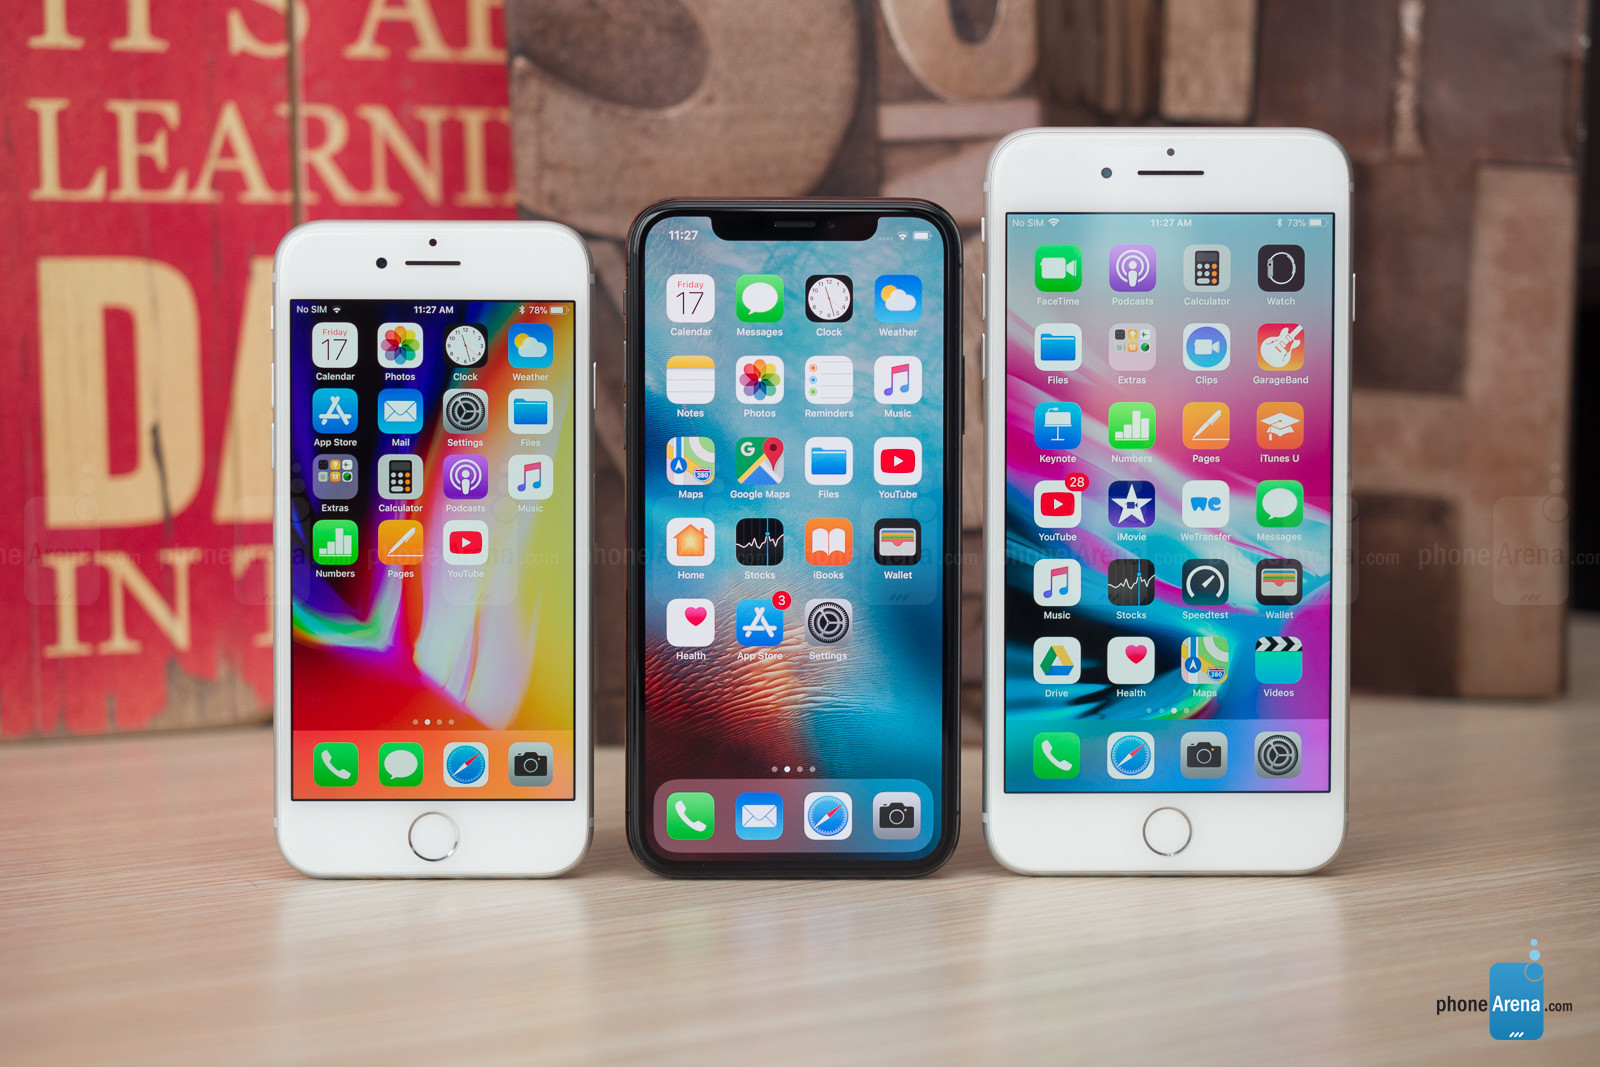 Apple to cut down prices for iPhone X, iPhone 8 and 8 Plus as demand